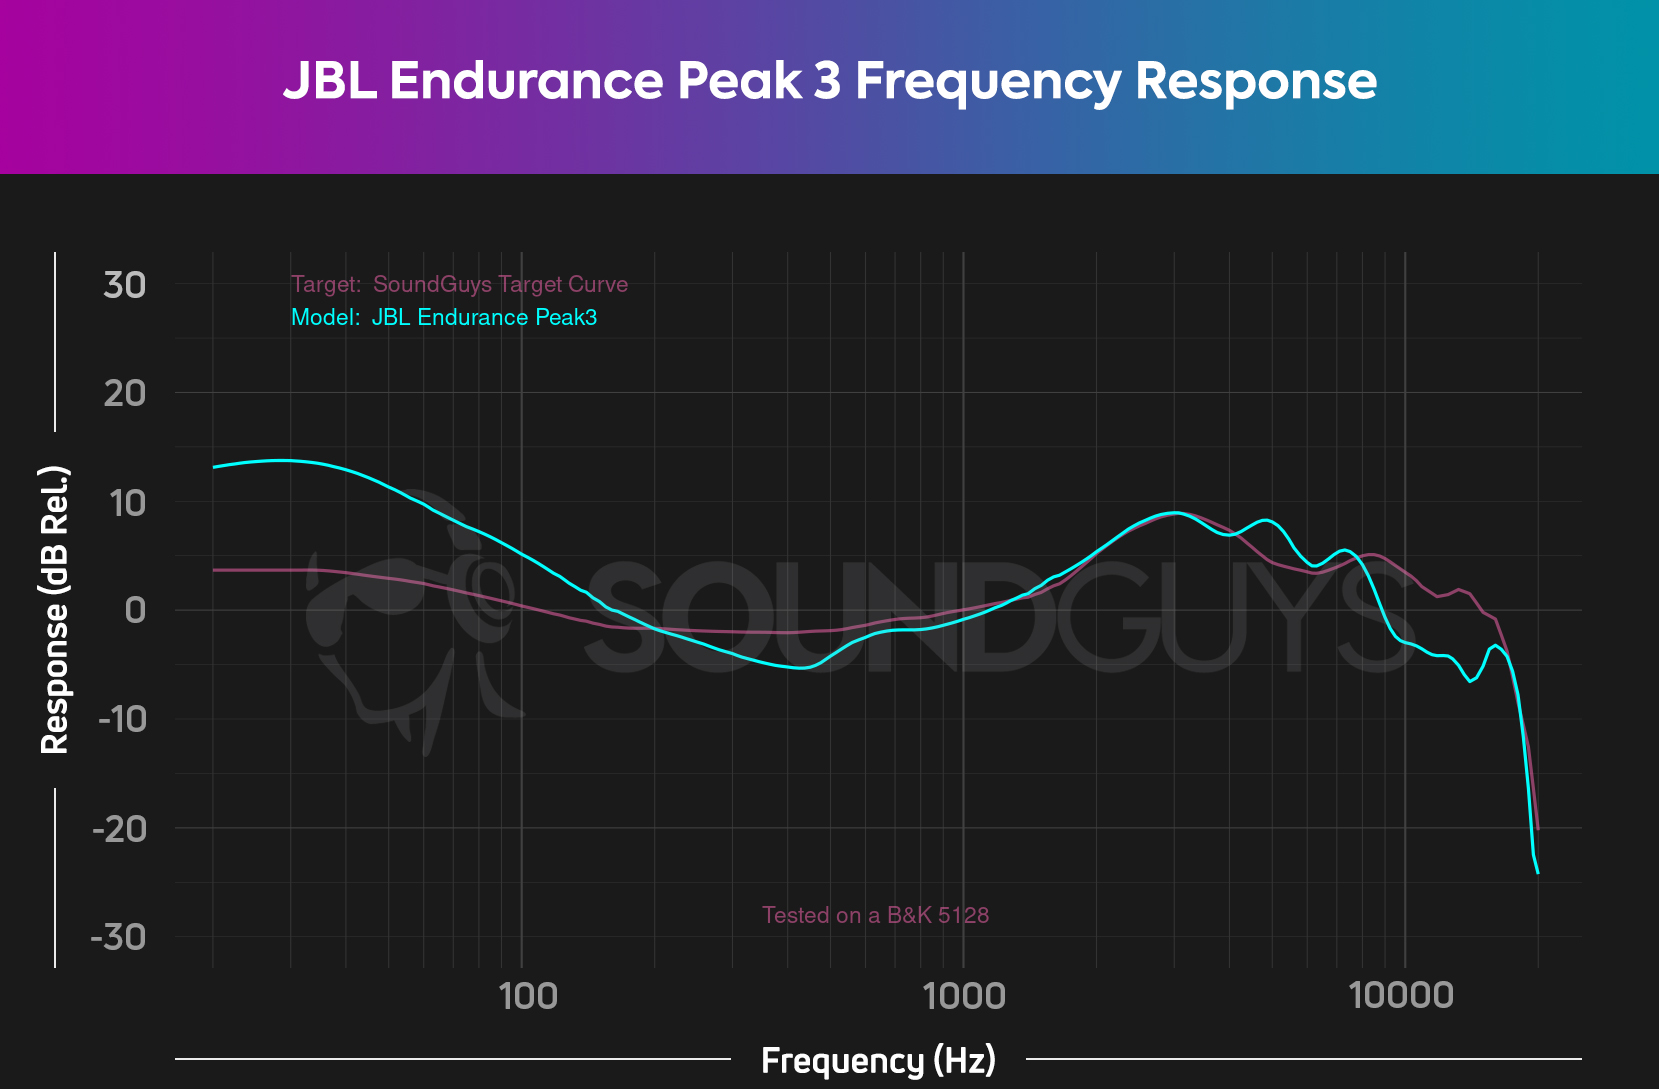 A chart showing the frequency response of the JBL Endurance Peak 3 with a significant boost to low frequencies